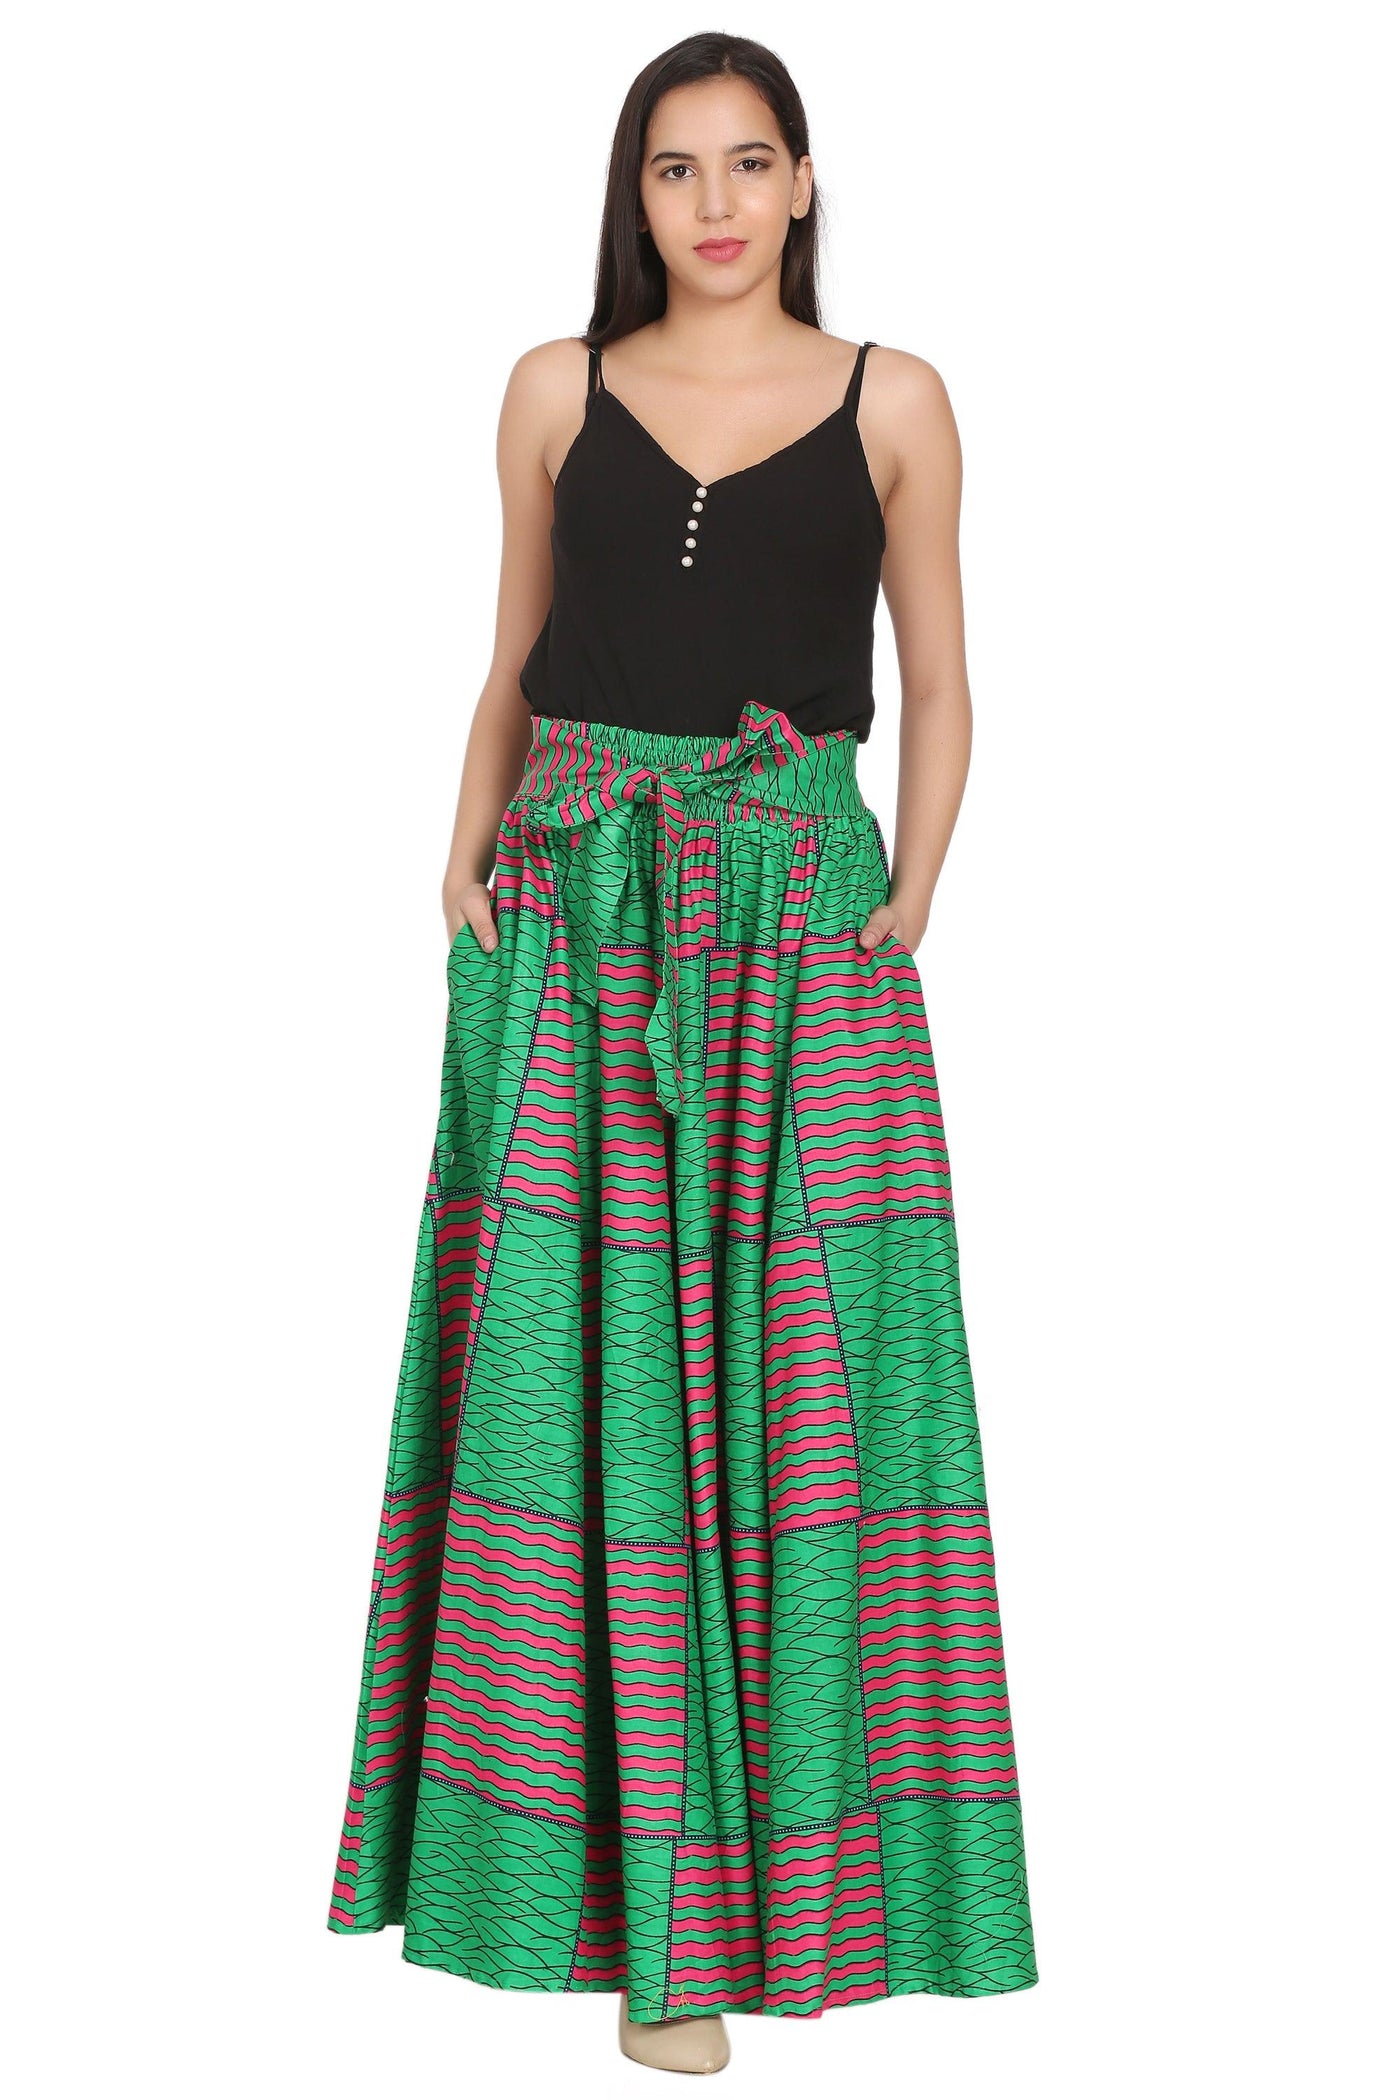 African Print Wax Print Skirt One Size Fits Most Headwrap Included Elastic Waist Pockets 16317-618